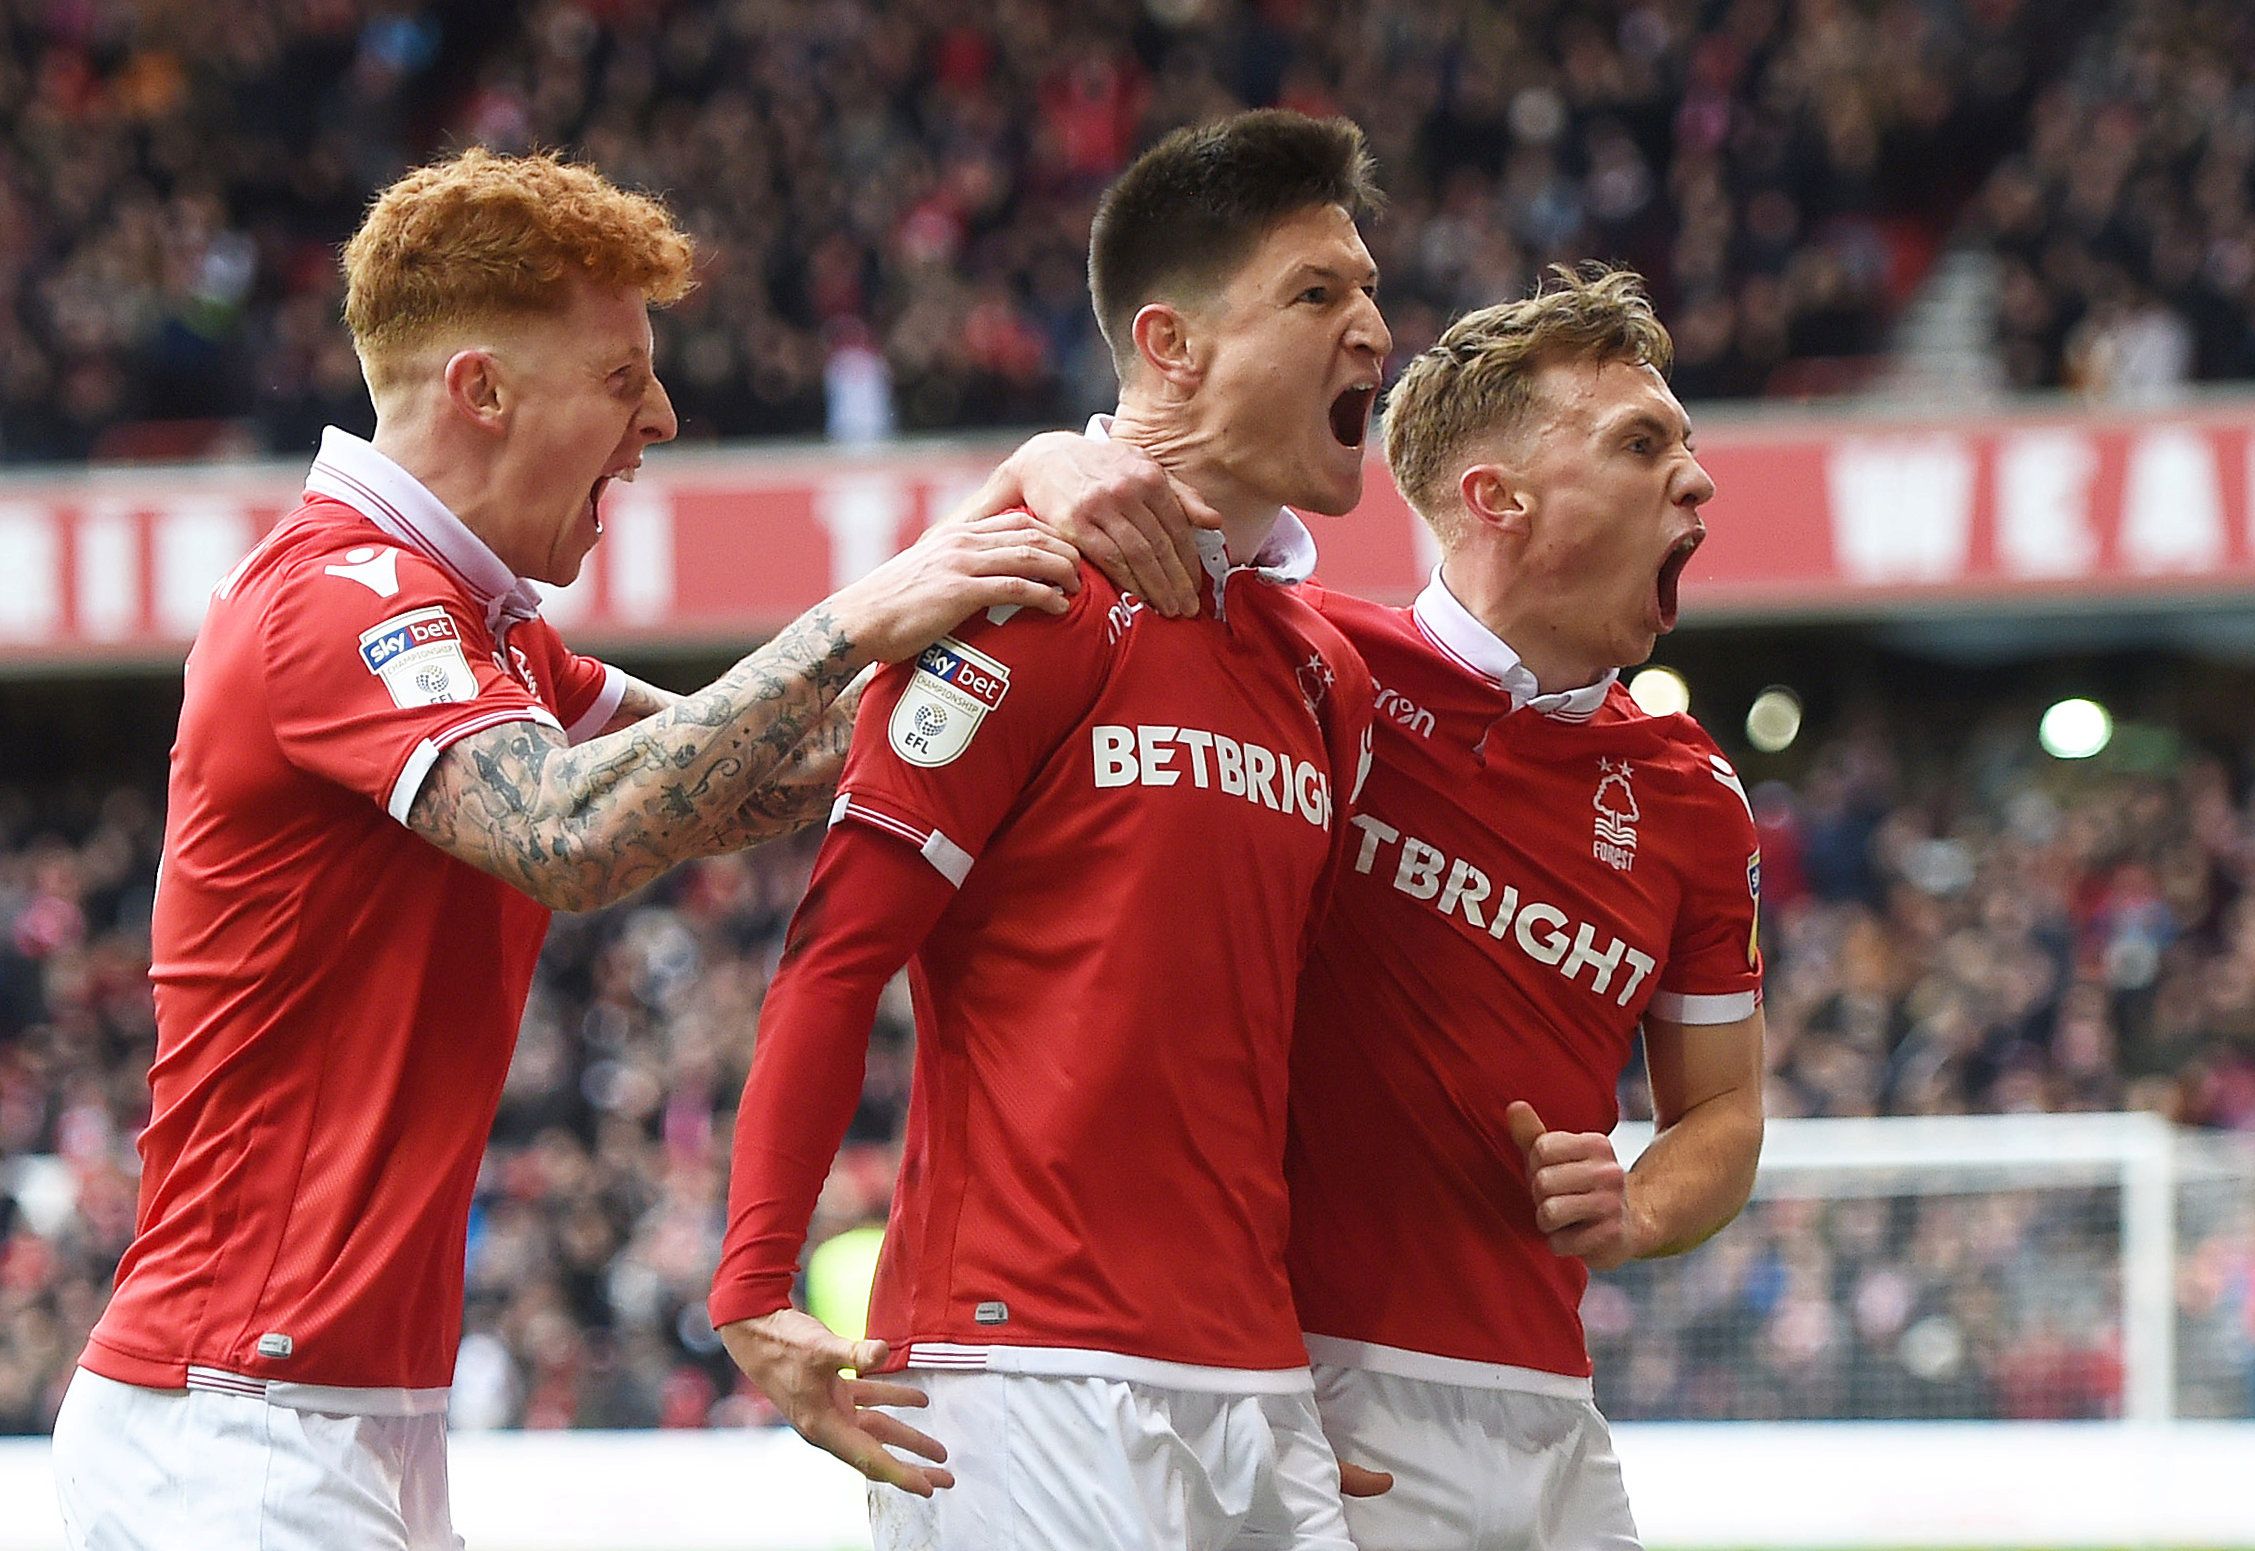 Soccer Football - Championship - Nottingham Forest v Wigan Athletic - The City Ground, Nottingham, Britain - January 26, 2019  Nottingham Forest's Joe Lolley celebrates scoring their first goal     Action Images/Alan Walter  EDITORIAL USE ONLY. No use with unauthorized audio, video, data, fixture lists, club/league logos or 